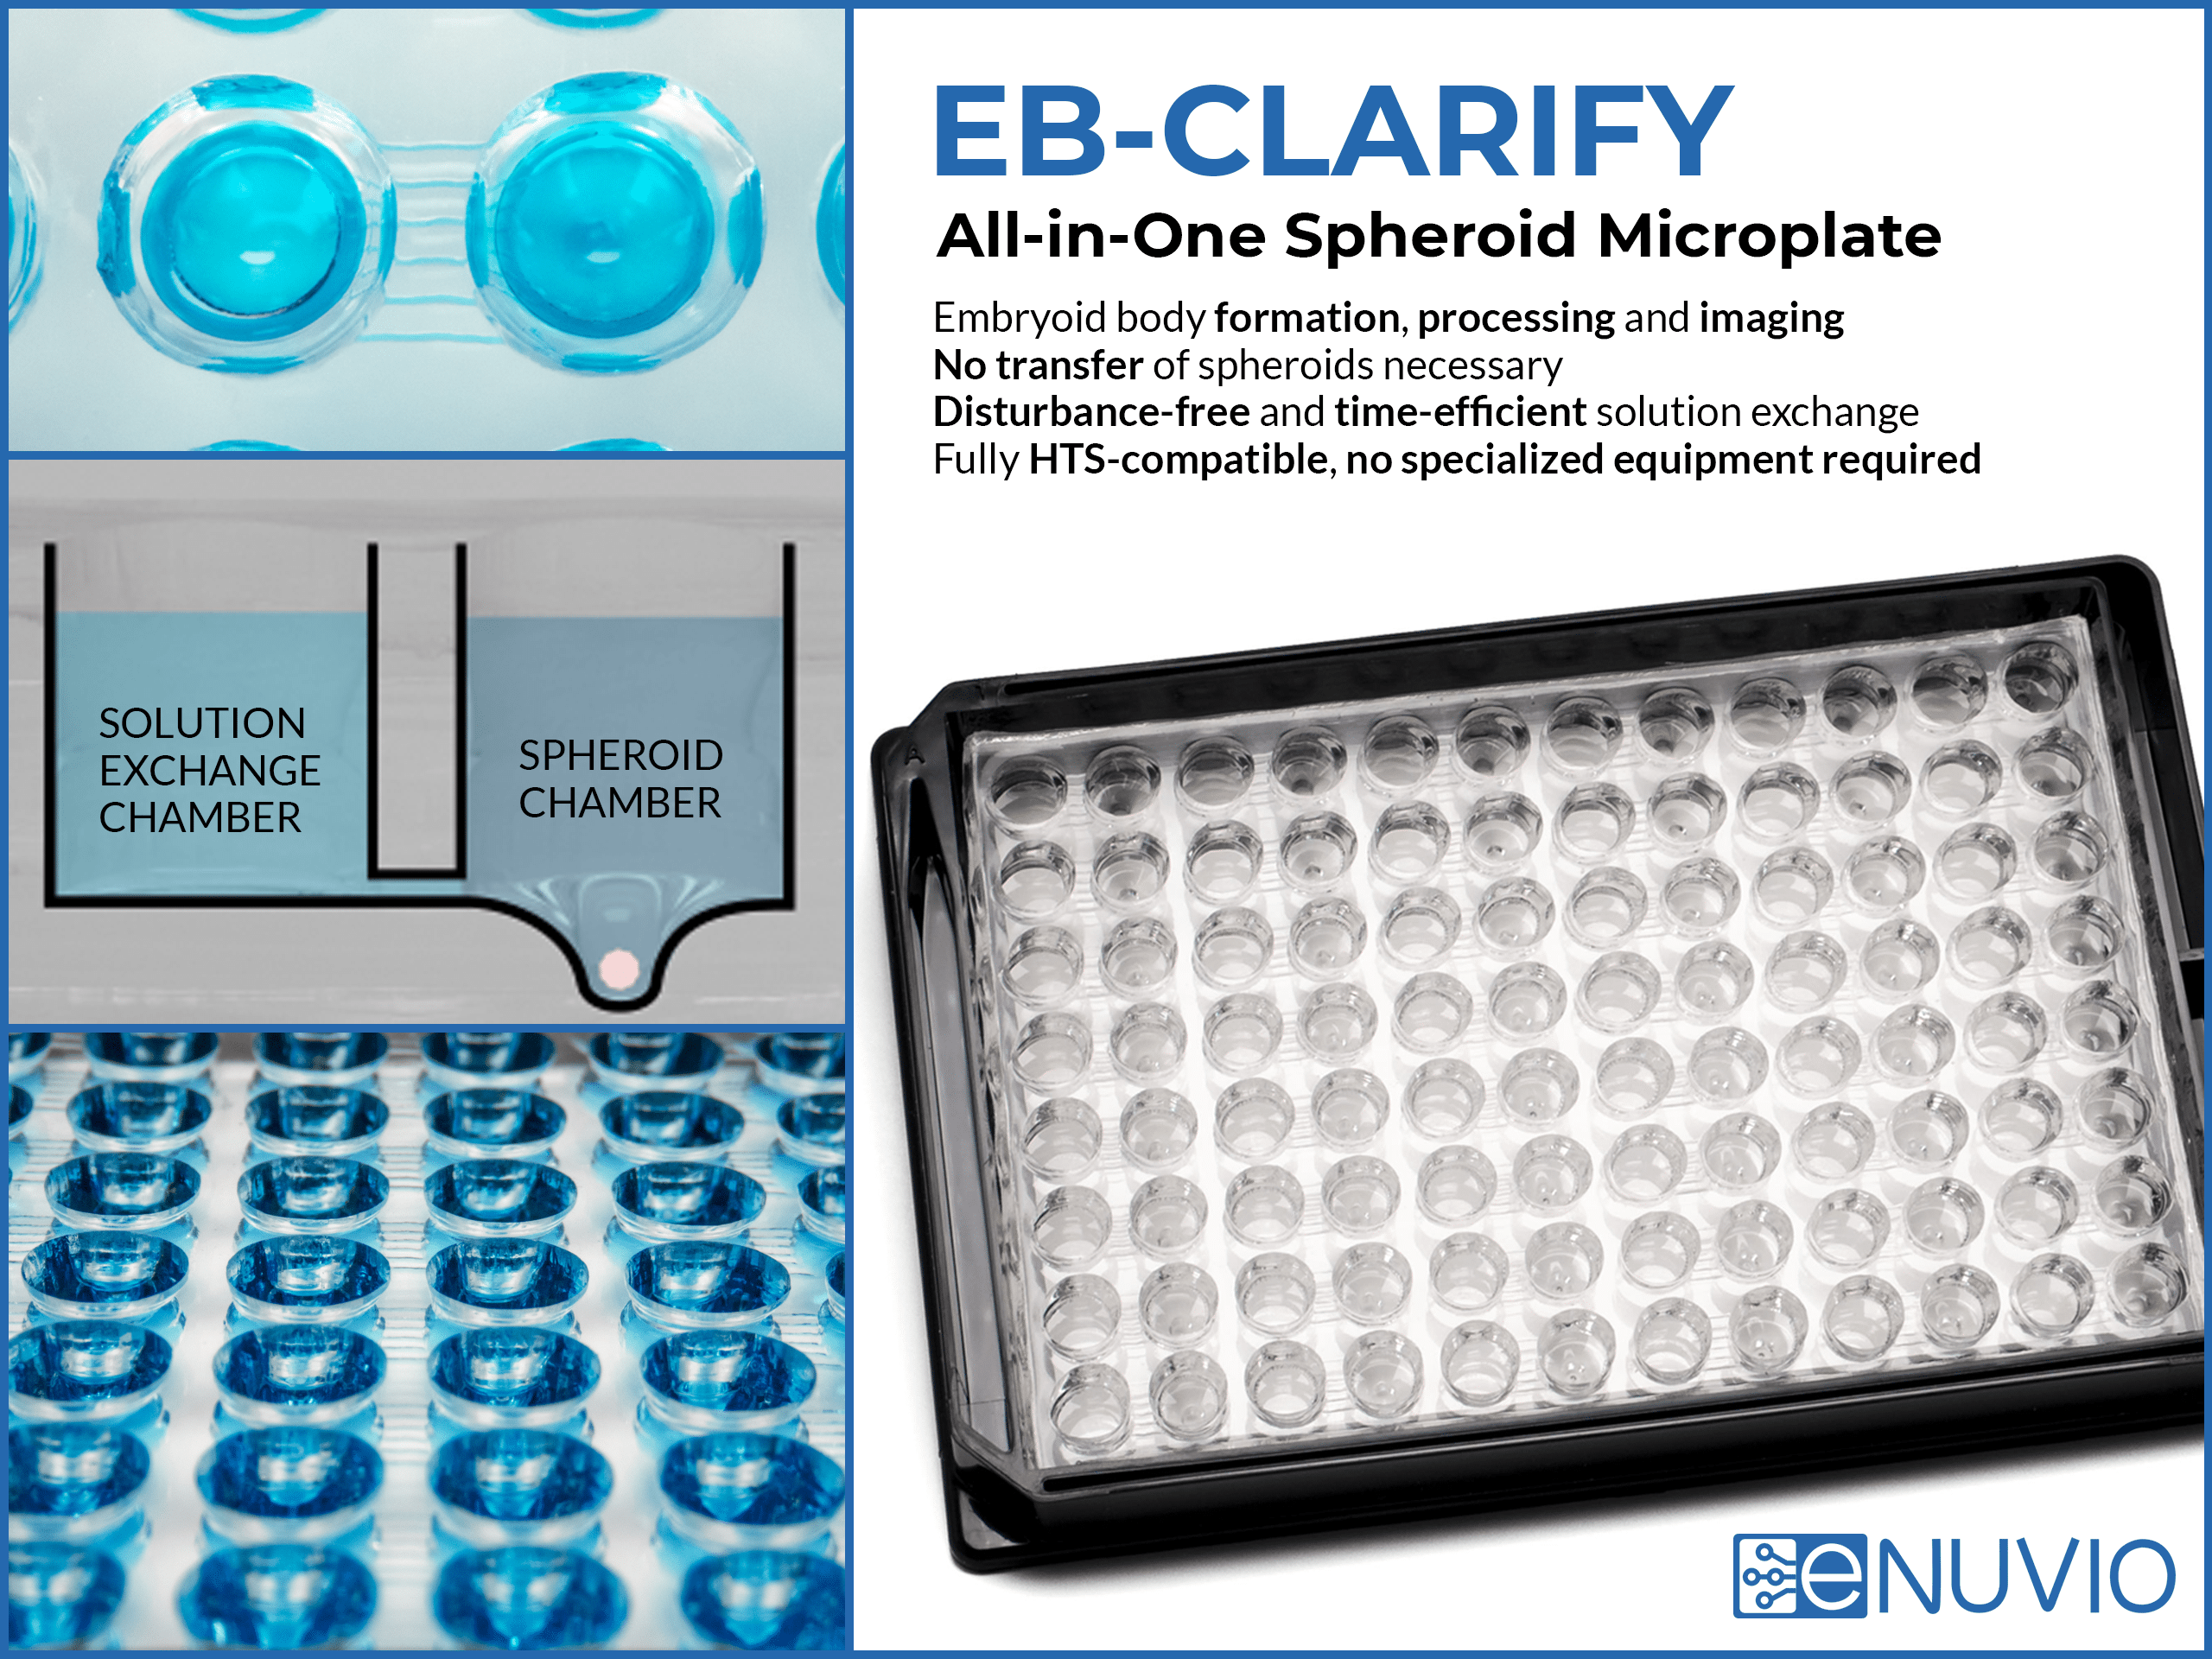 EB-CLARIFY all-in-one spheroid microplate. Embryoid body formation, processing and imaging. No transfer of spheroid necessary. Disturbance-free and time-efficient solution exchange. Fully HTS-compatible, no specialized equipment required.